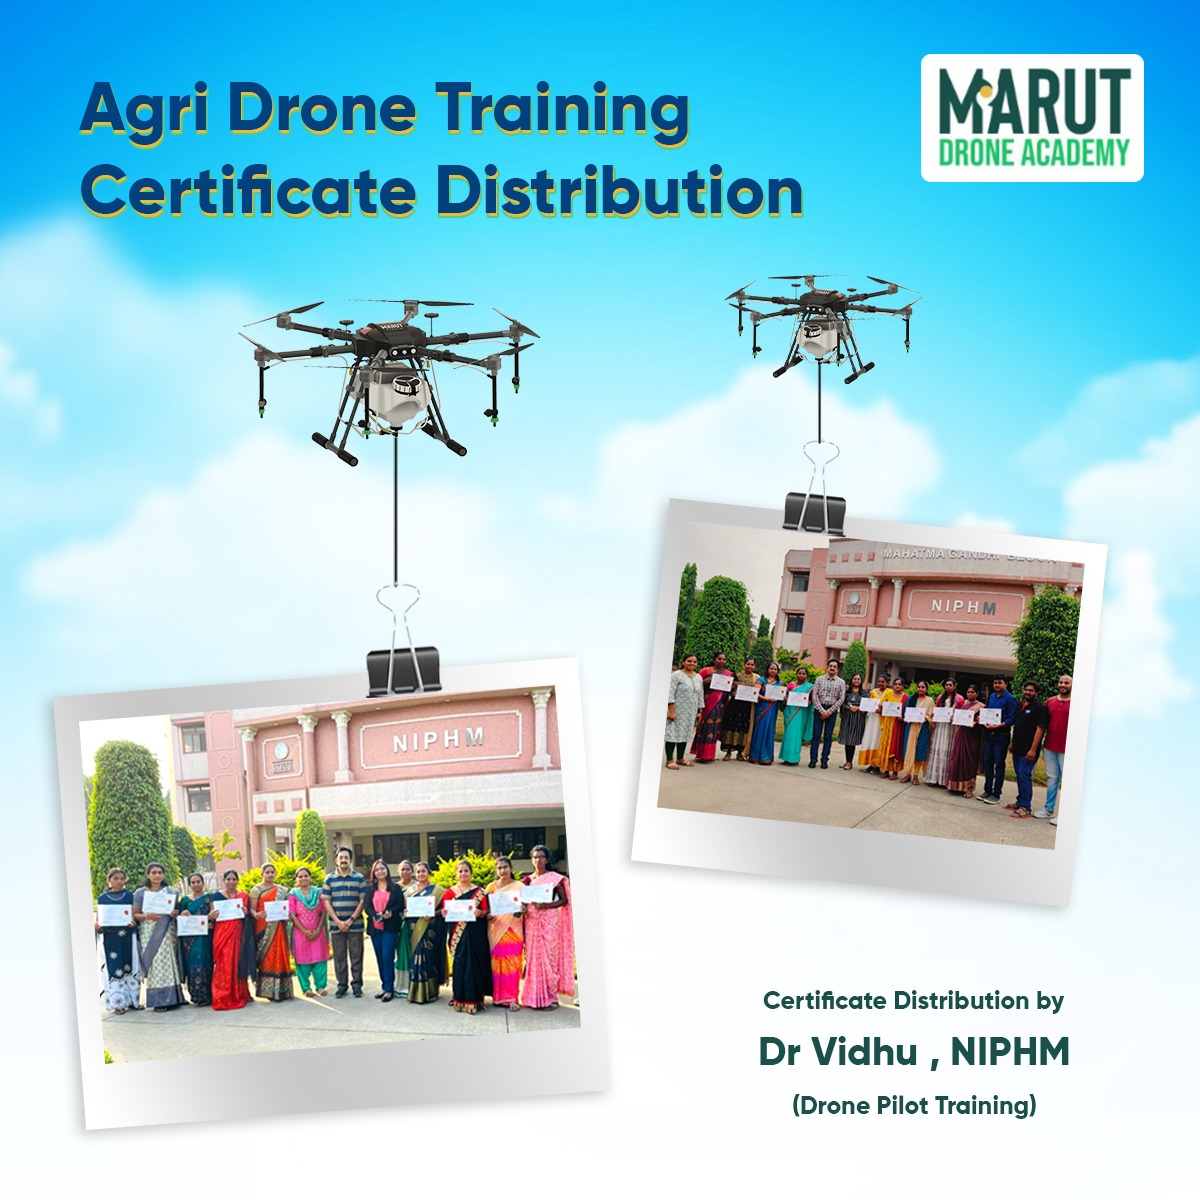 🌱 Join us for an exciting journey into the future of agriculture with #DronePilotTraining and #RemotePilotCertificate 
Also upgrade yourself on #AgriDrone flying Training and get Certificate 🚁🌾
For registration and inquiries, contact: 9515775473